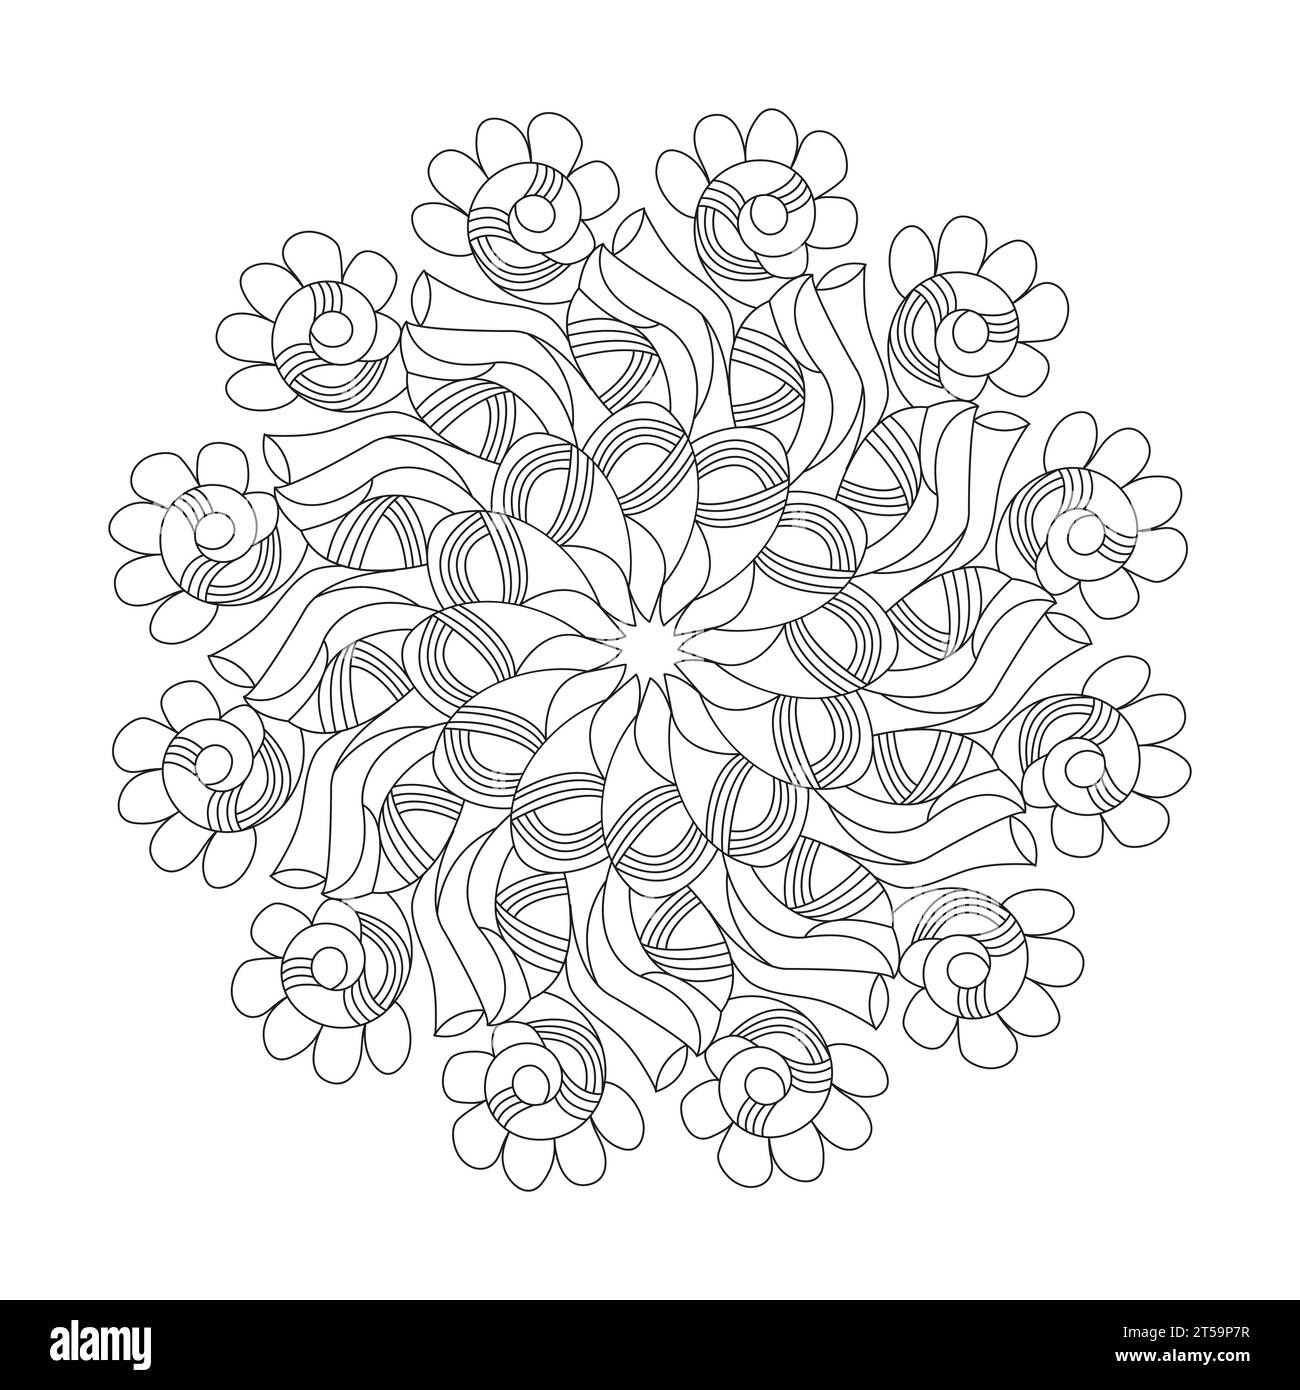 Beautiful Patterns: Relaxing Coloring Book for Adult Relaxation